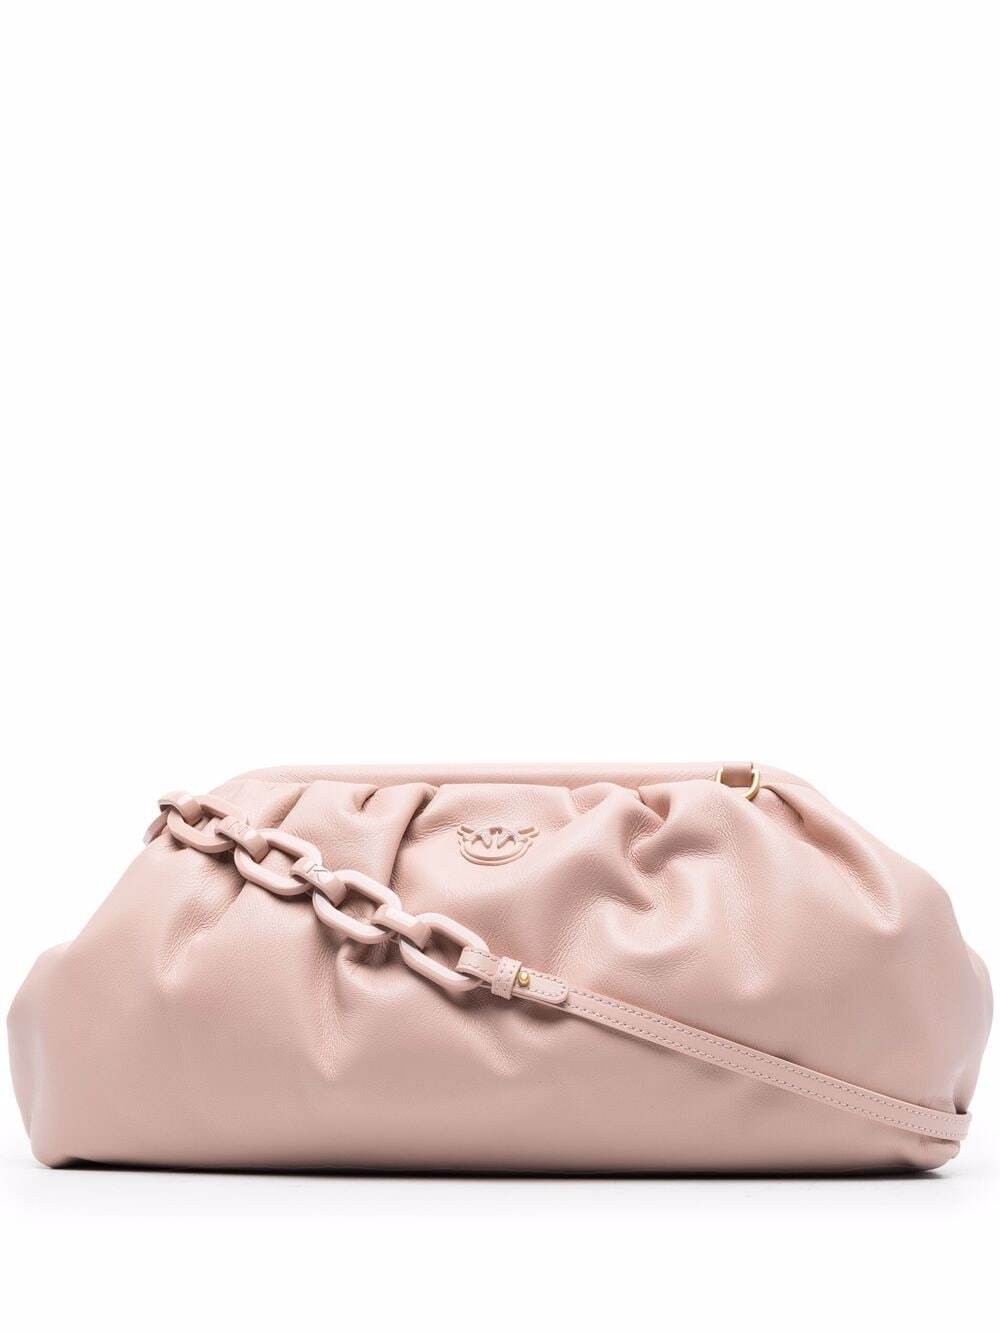 PINKO chain-link leather clutch bag in pink